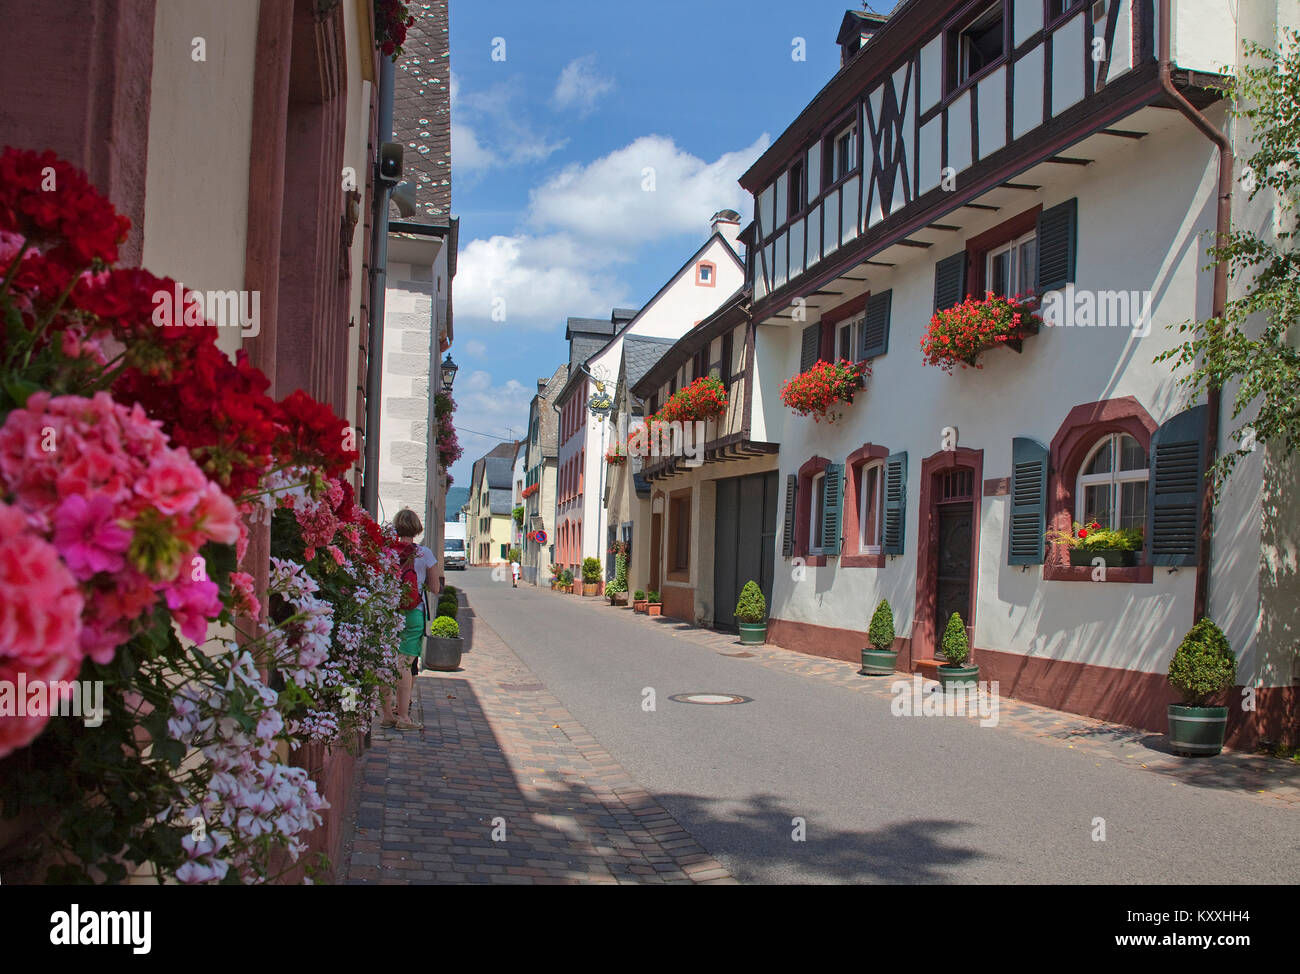 Roman street with typical houses , Neumagen, Neumagen-Dhron, oldest wine village of Germany, Moselle river, Rhineland-Palatinate, Germany, Europe Stock Photo